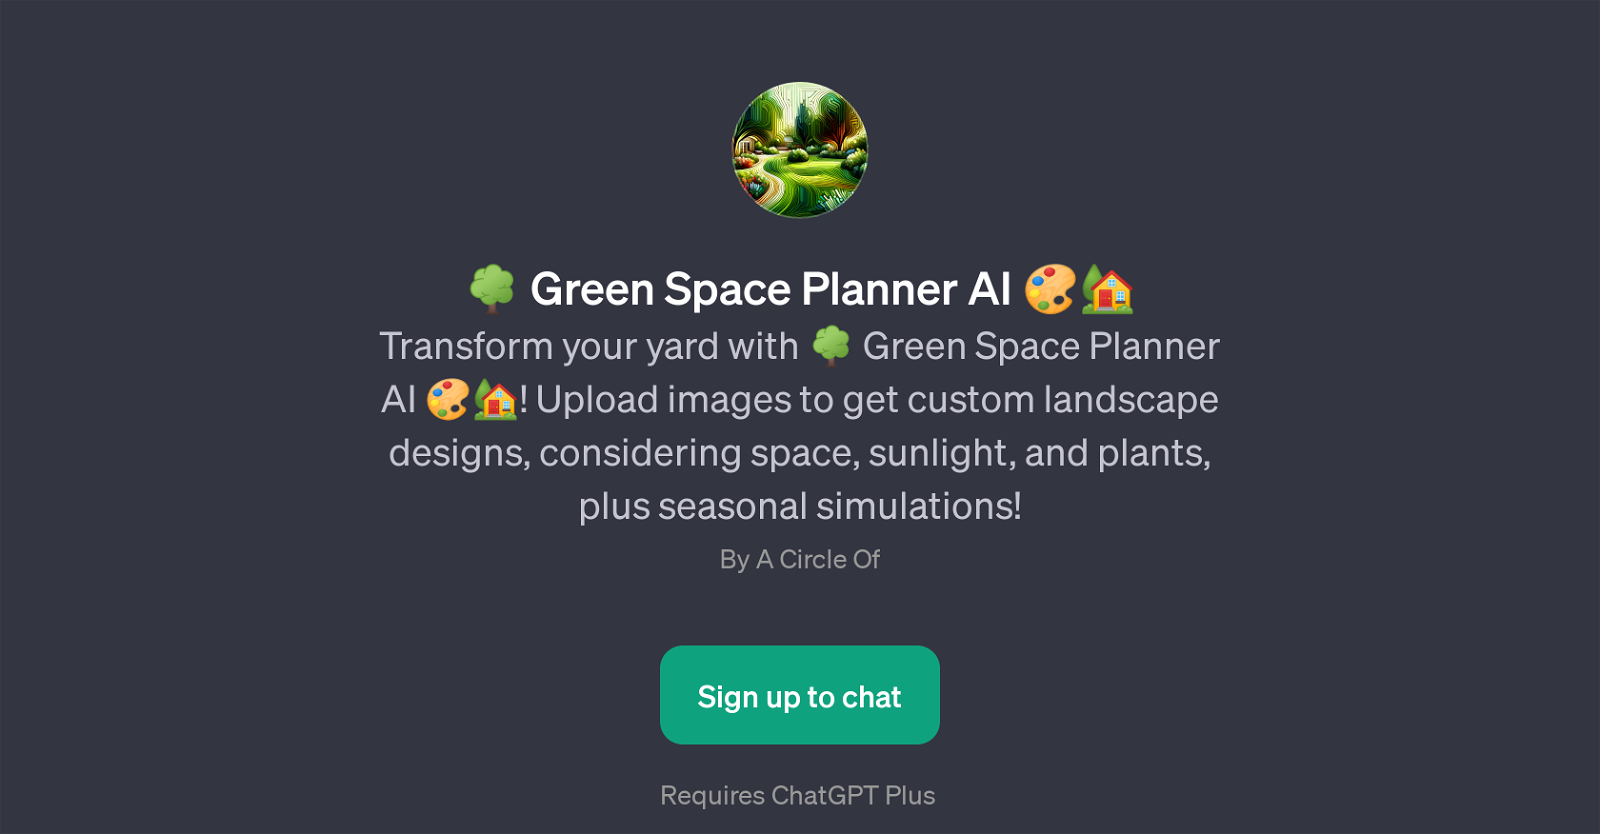 Green Space Planner AI website